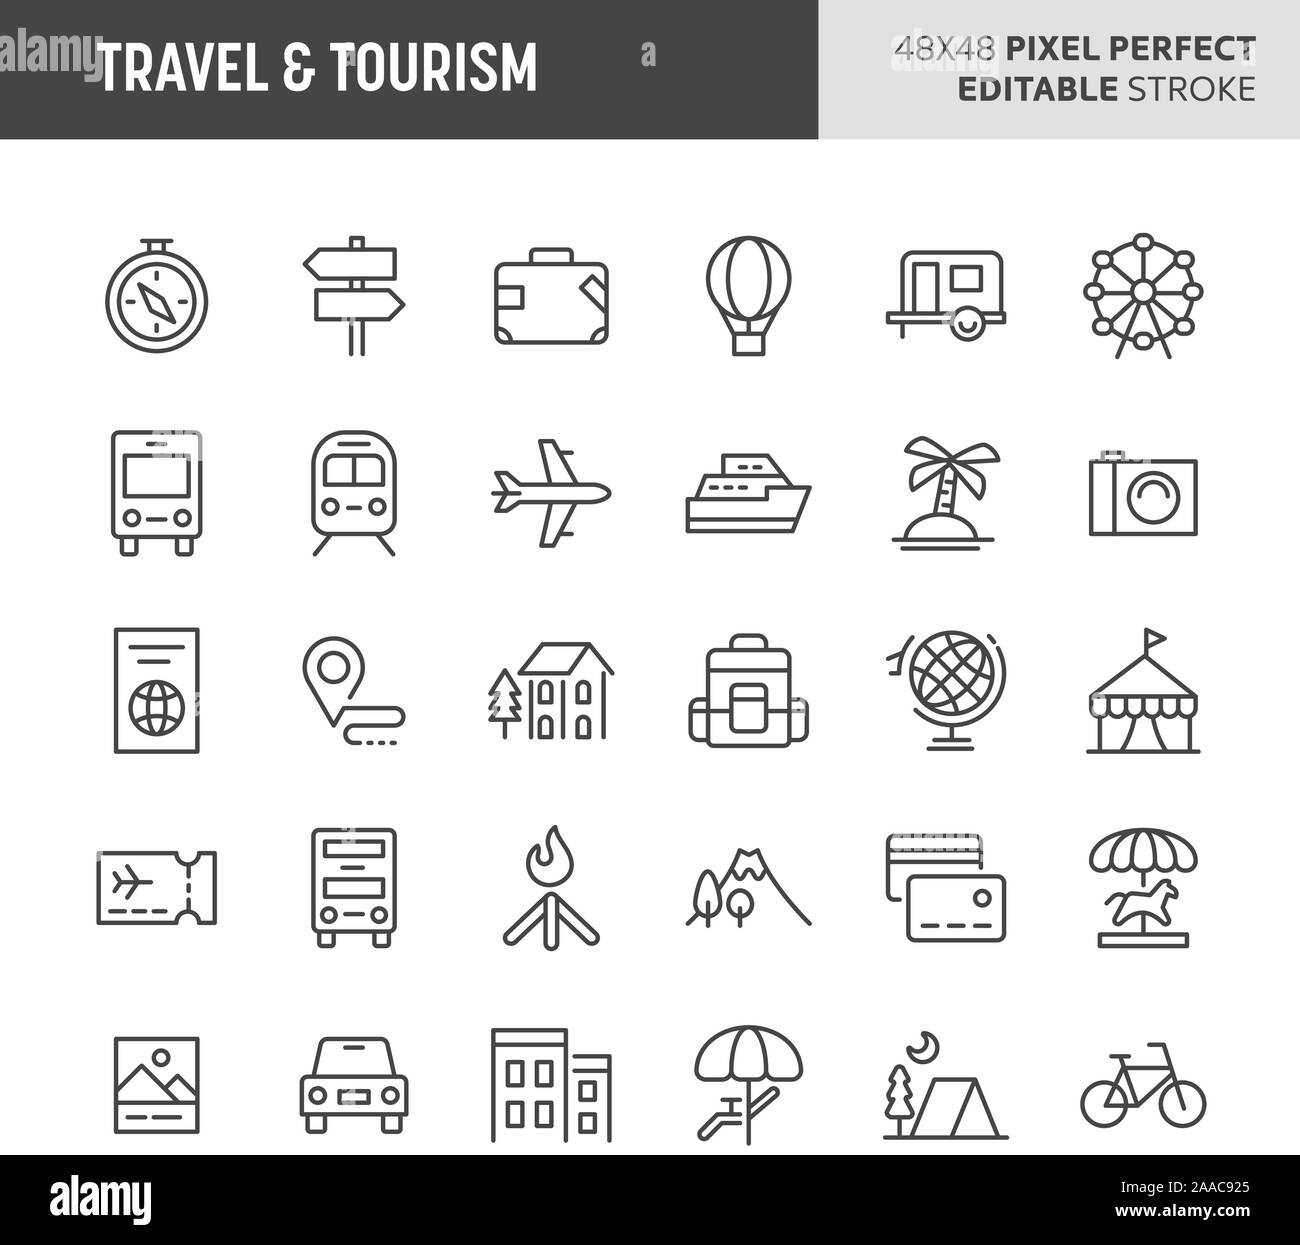 30 thin line icons associated with travel & tourism. Symbols such as accommodation, transportation and tourism sites are included in this set. 48x48 p Stock Vector